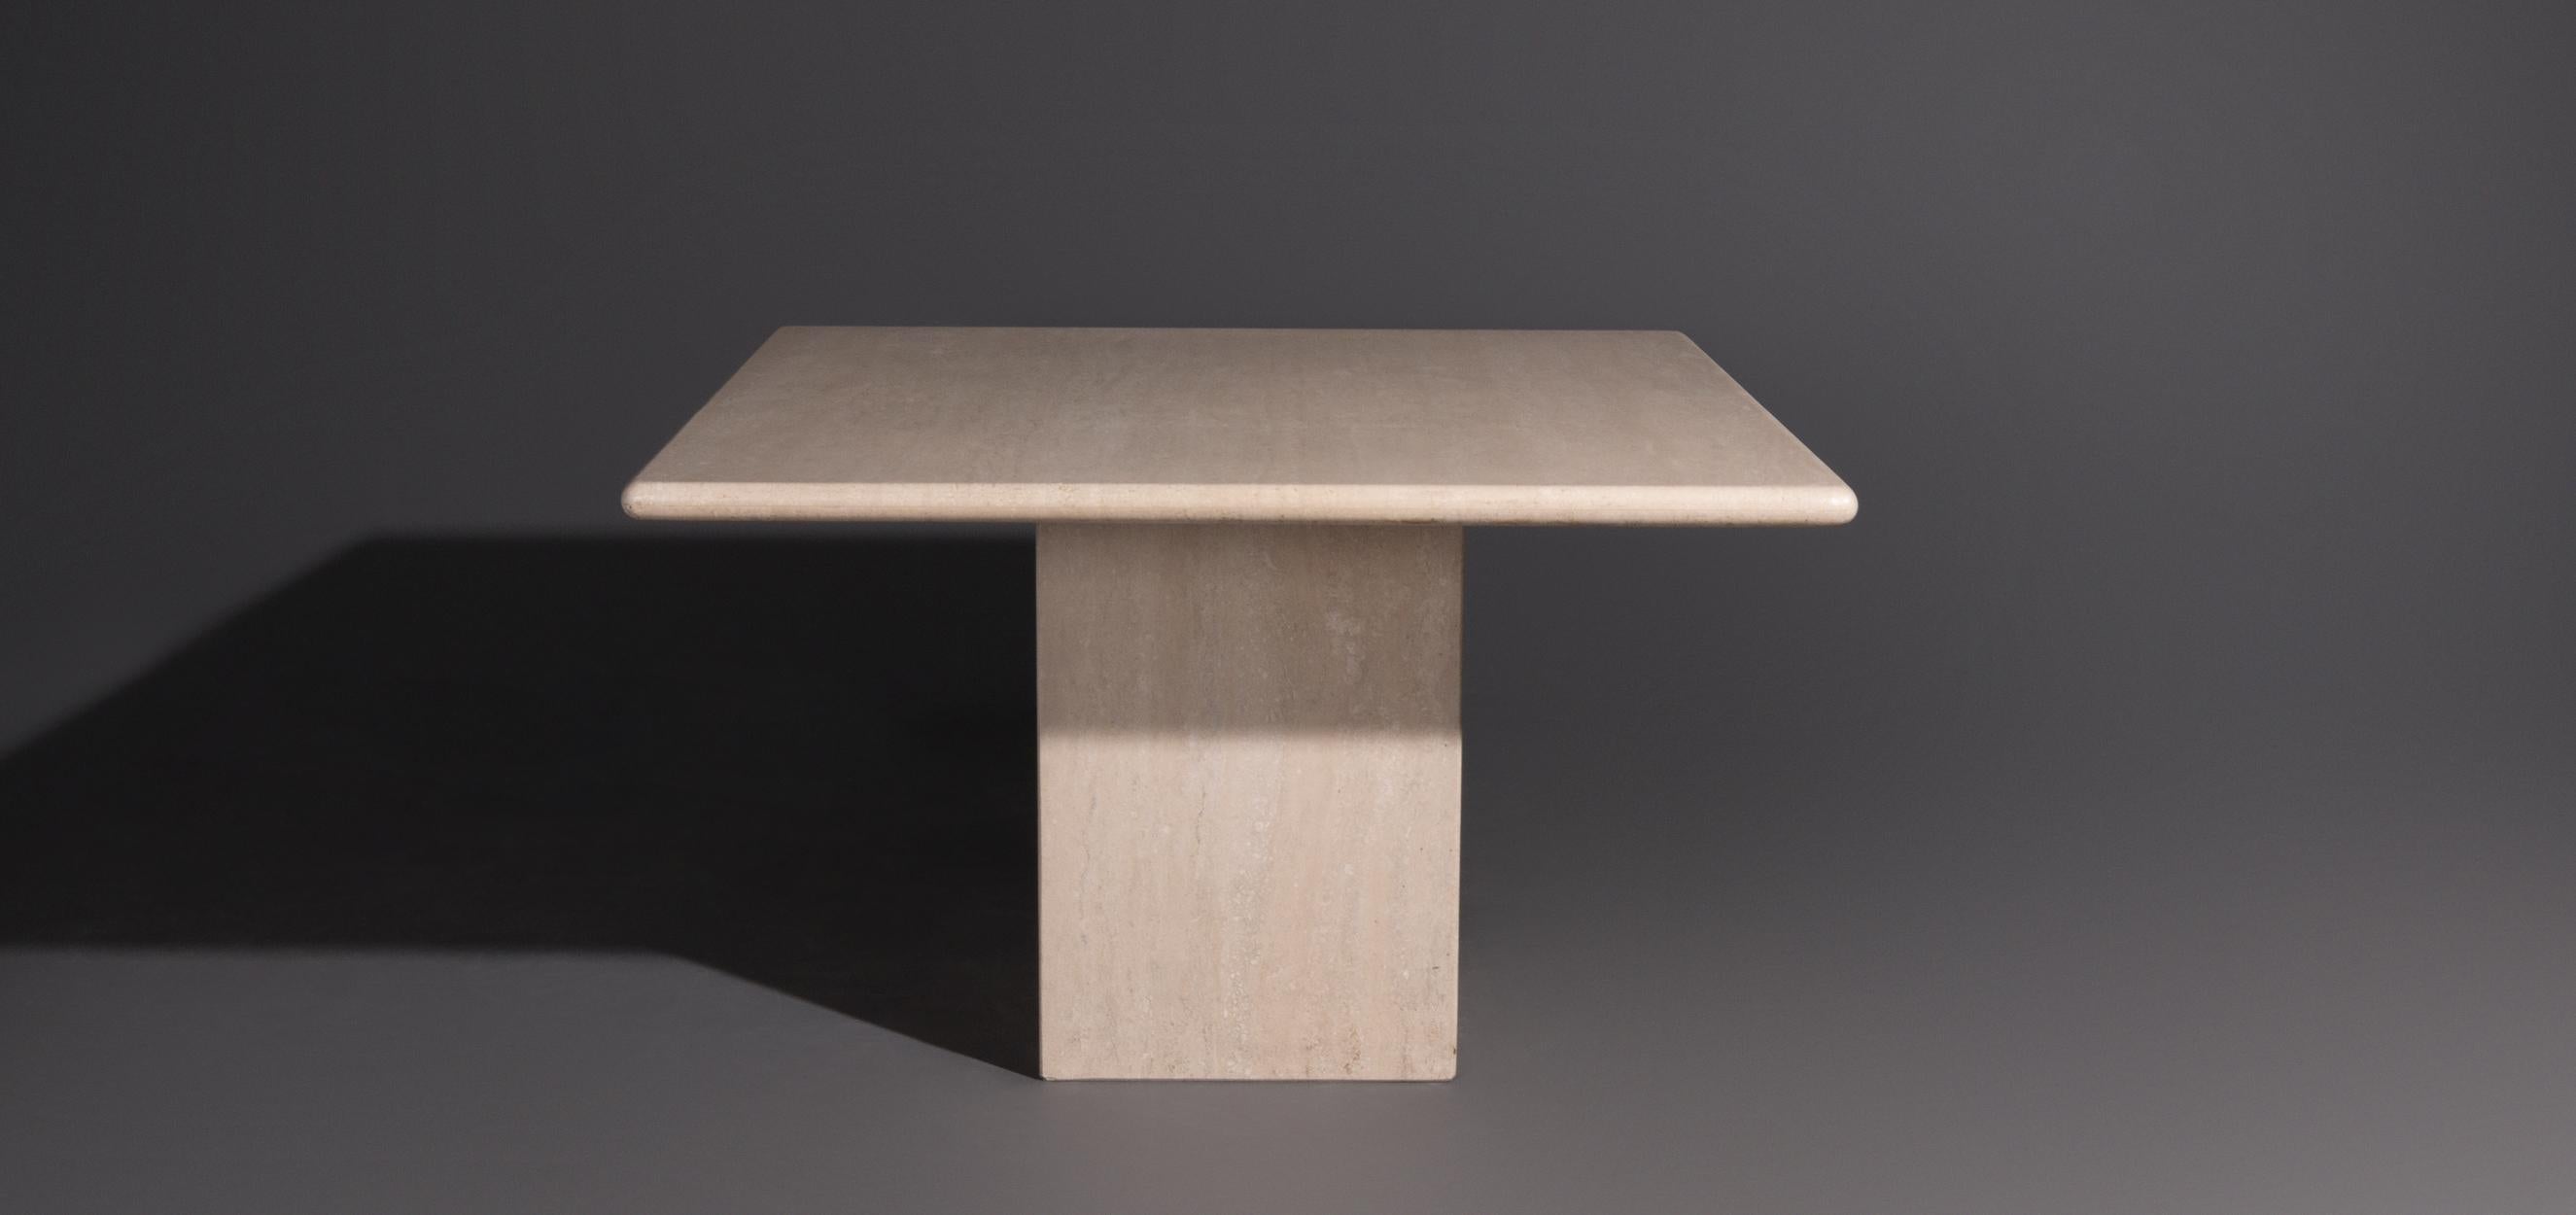 Travertine dining table with a square top. This dining room table has a top with rounded edges. The table is made of travertine, a natural stone with a beautiful pattern. The travertine has a beige color. The leg is loose from the leaf, but because